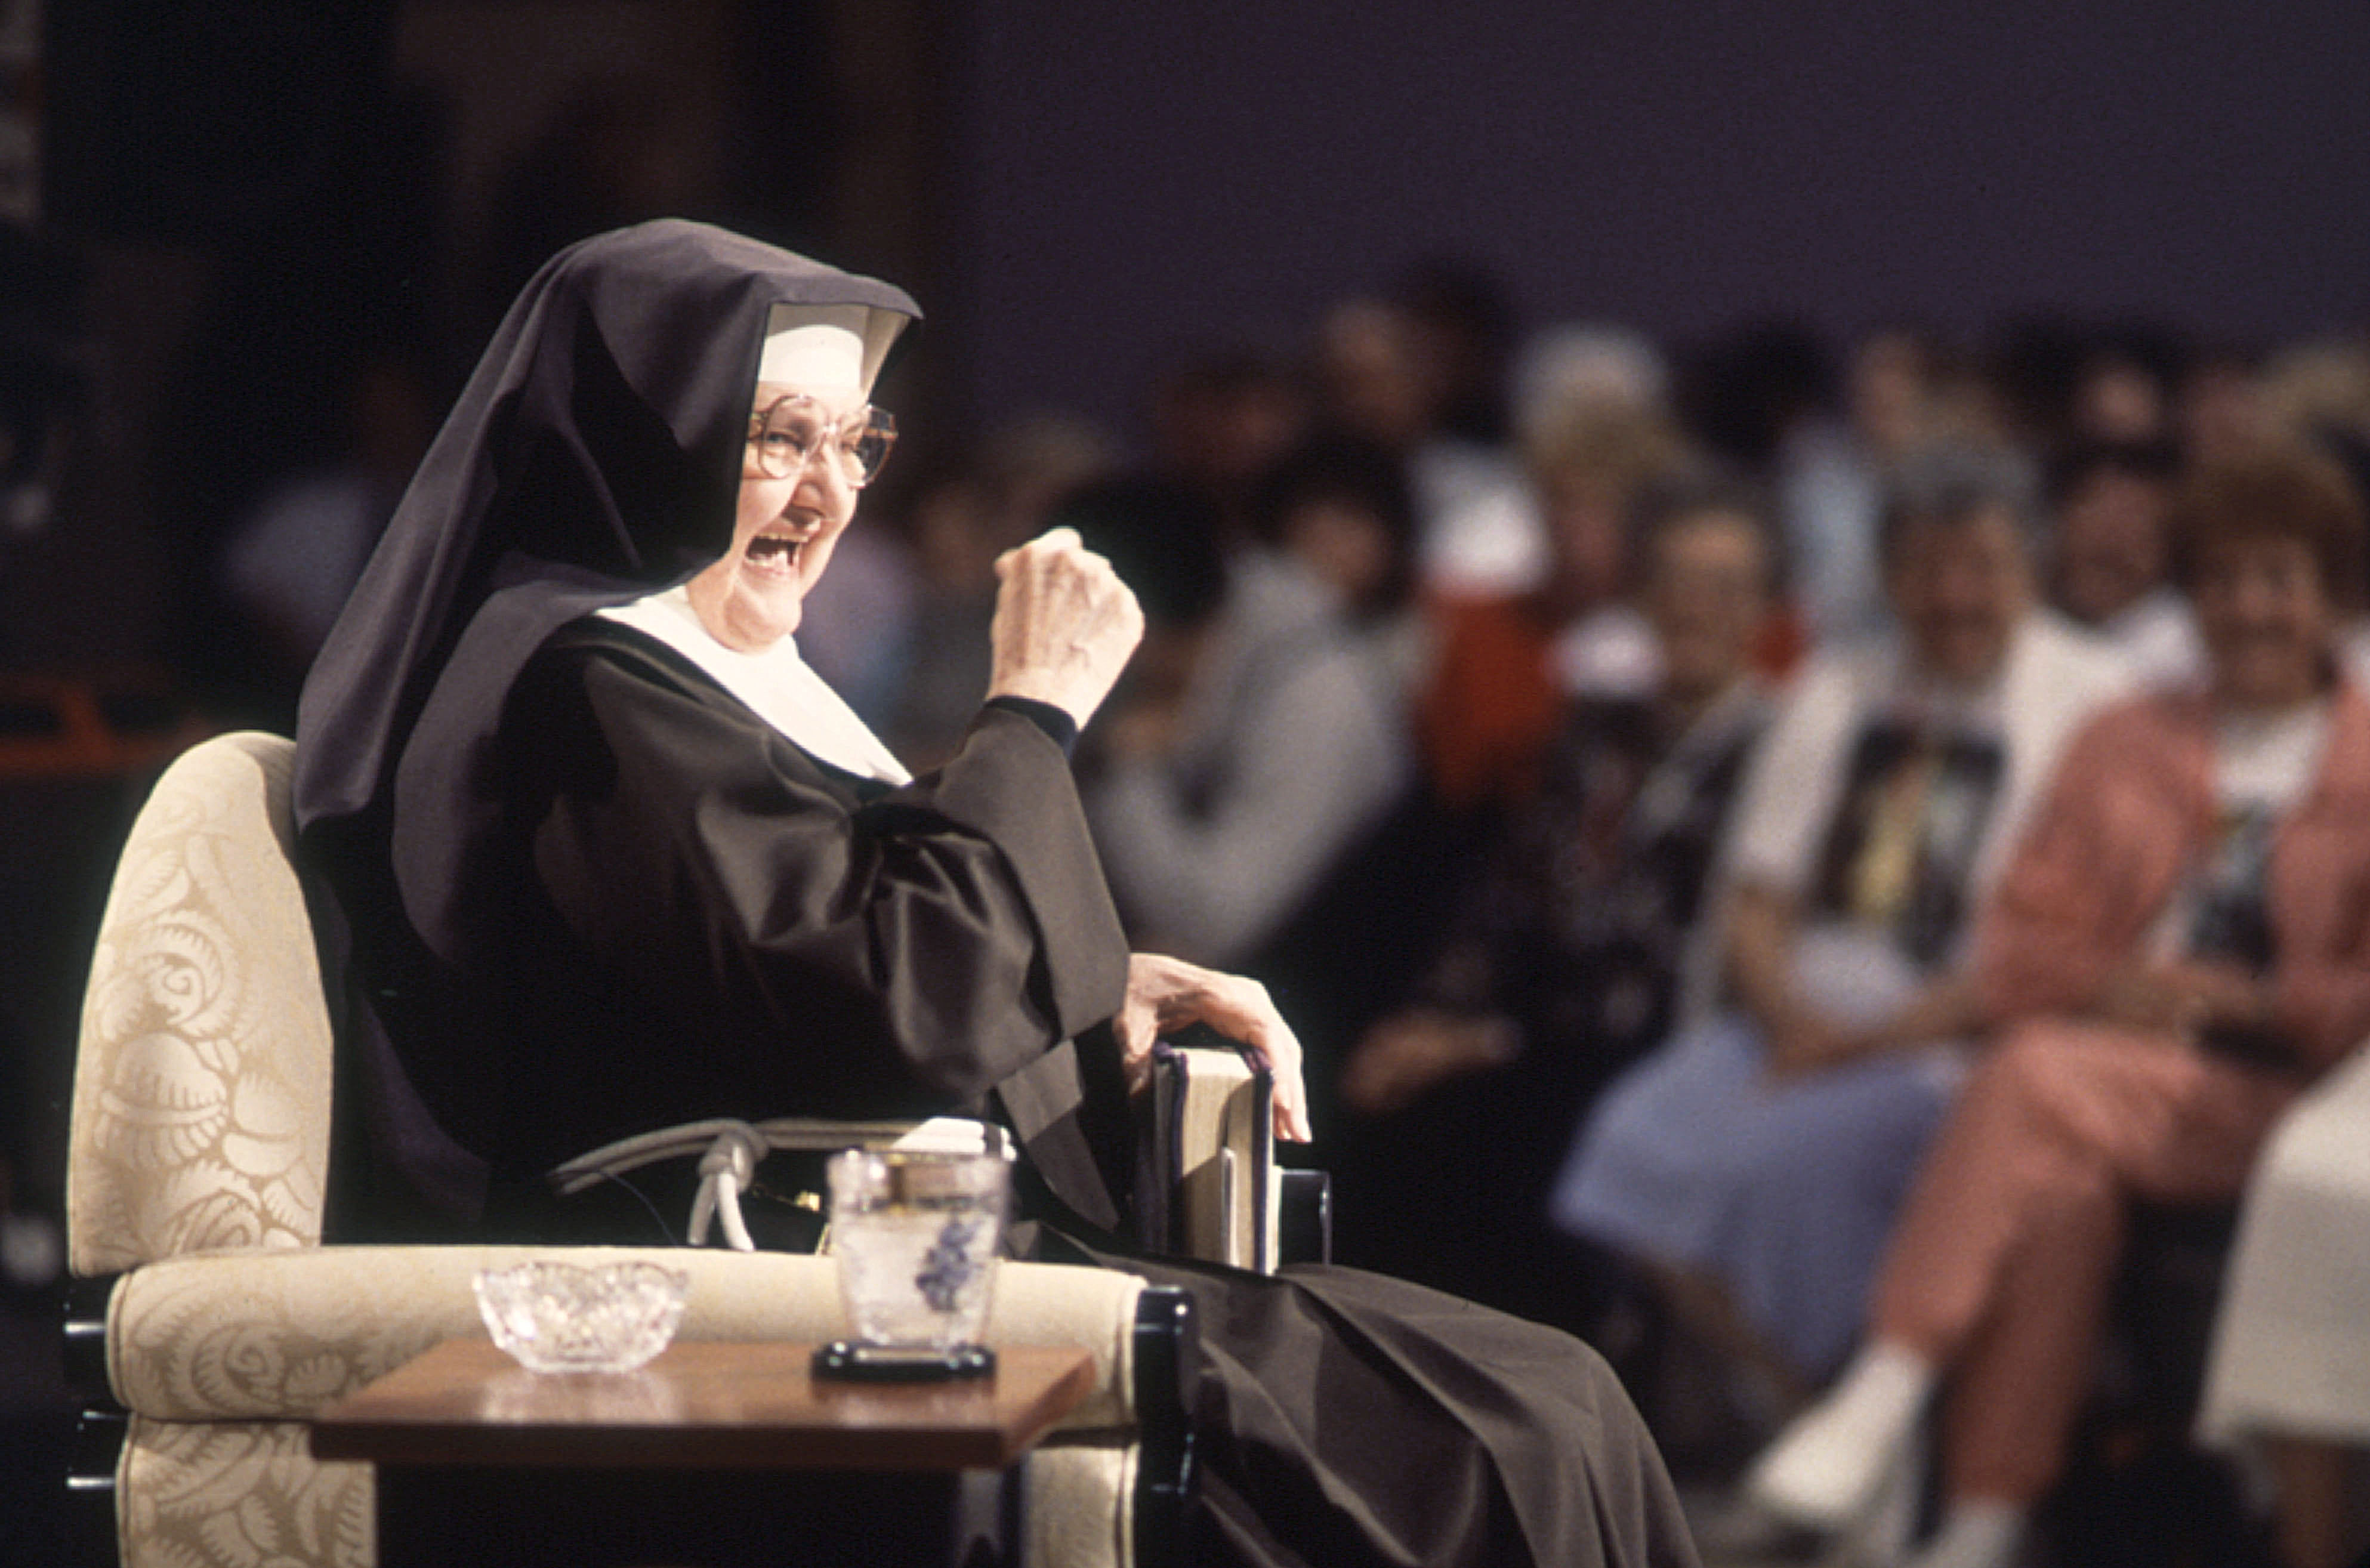 EWTN Foundress Mother Angelica hosted a twice-weekly program, “Mother Angelica Live,” from 1983 until 2001. The classic episodes of the program are still aired globally by the Network.